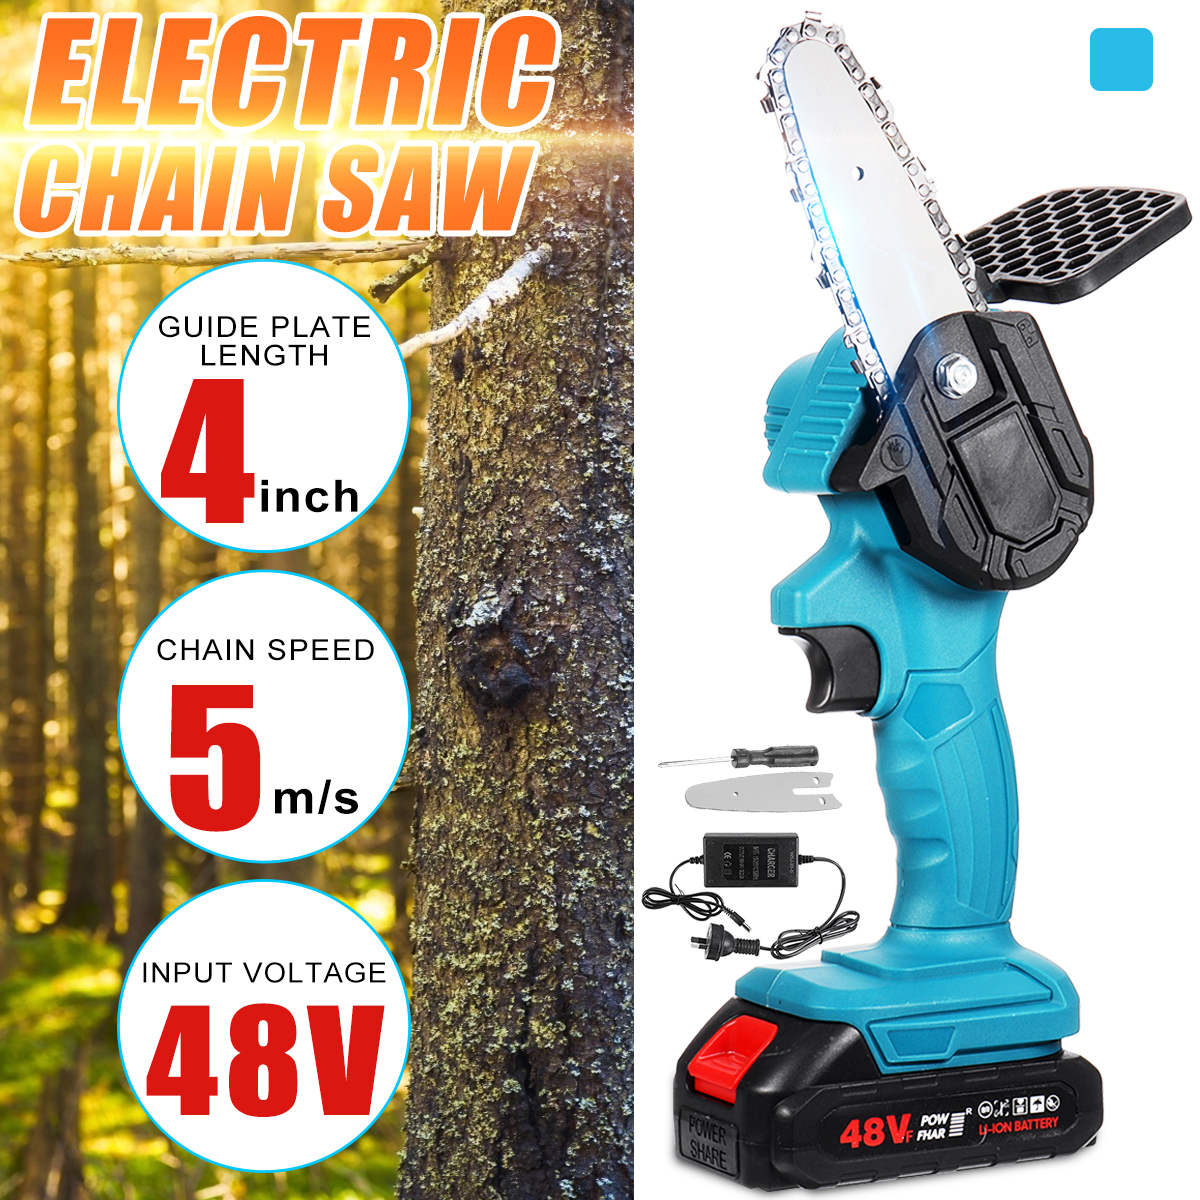 4inch-800W-48VF-Electric-Chain-Saw-Portable-Handheld-Wood-Cutter-Woodworking-Cutting-Tool-W-None1pc2-1827618-1